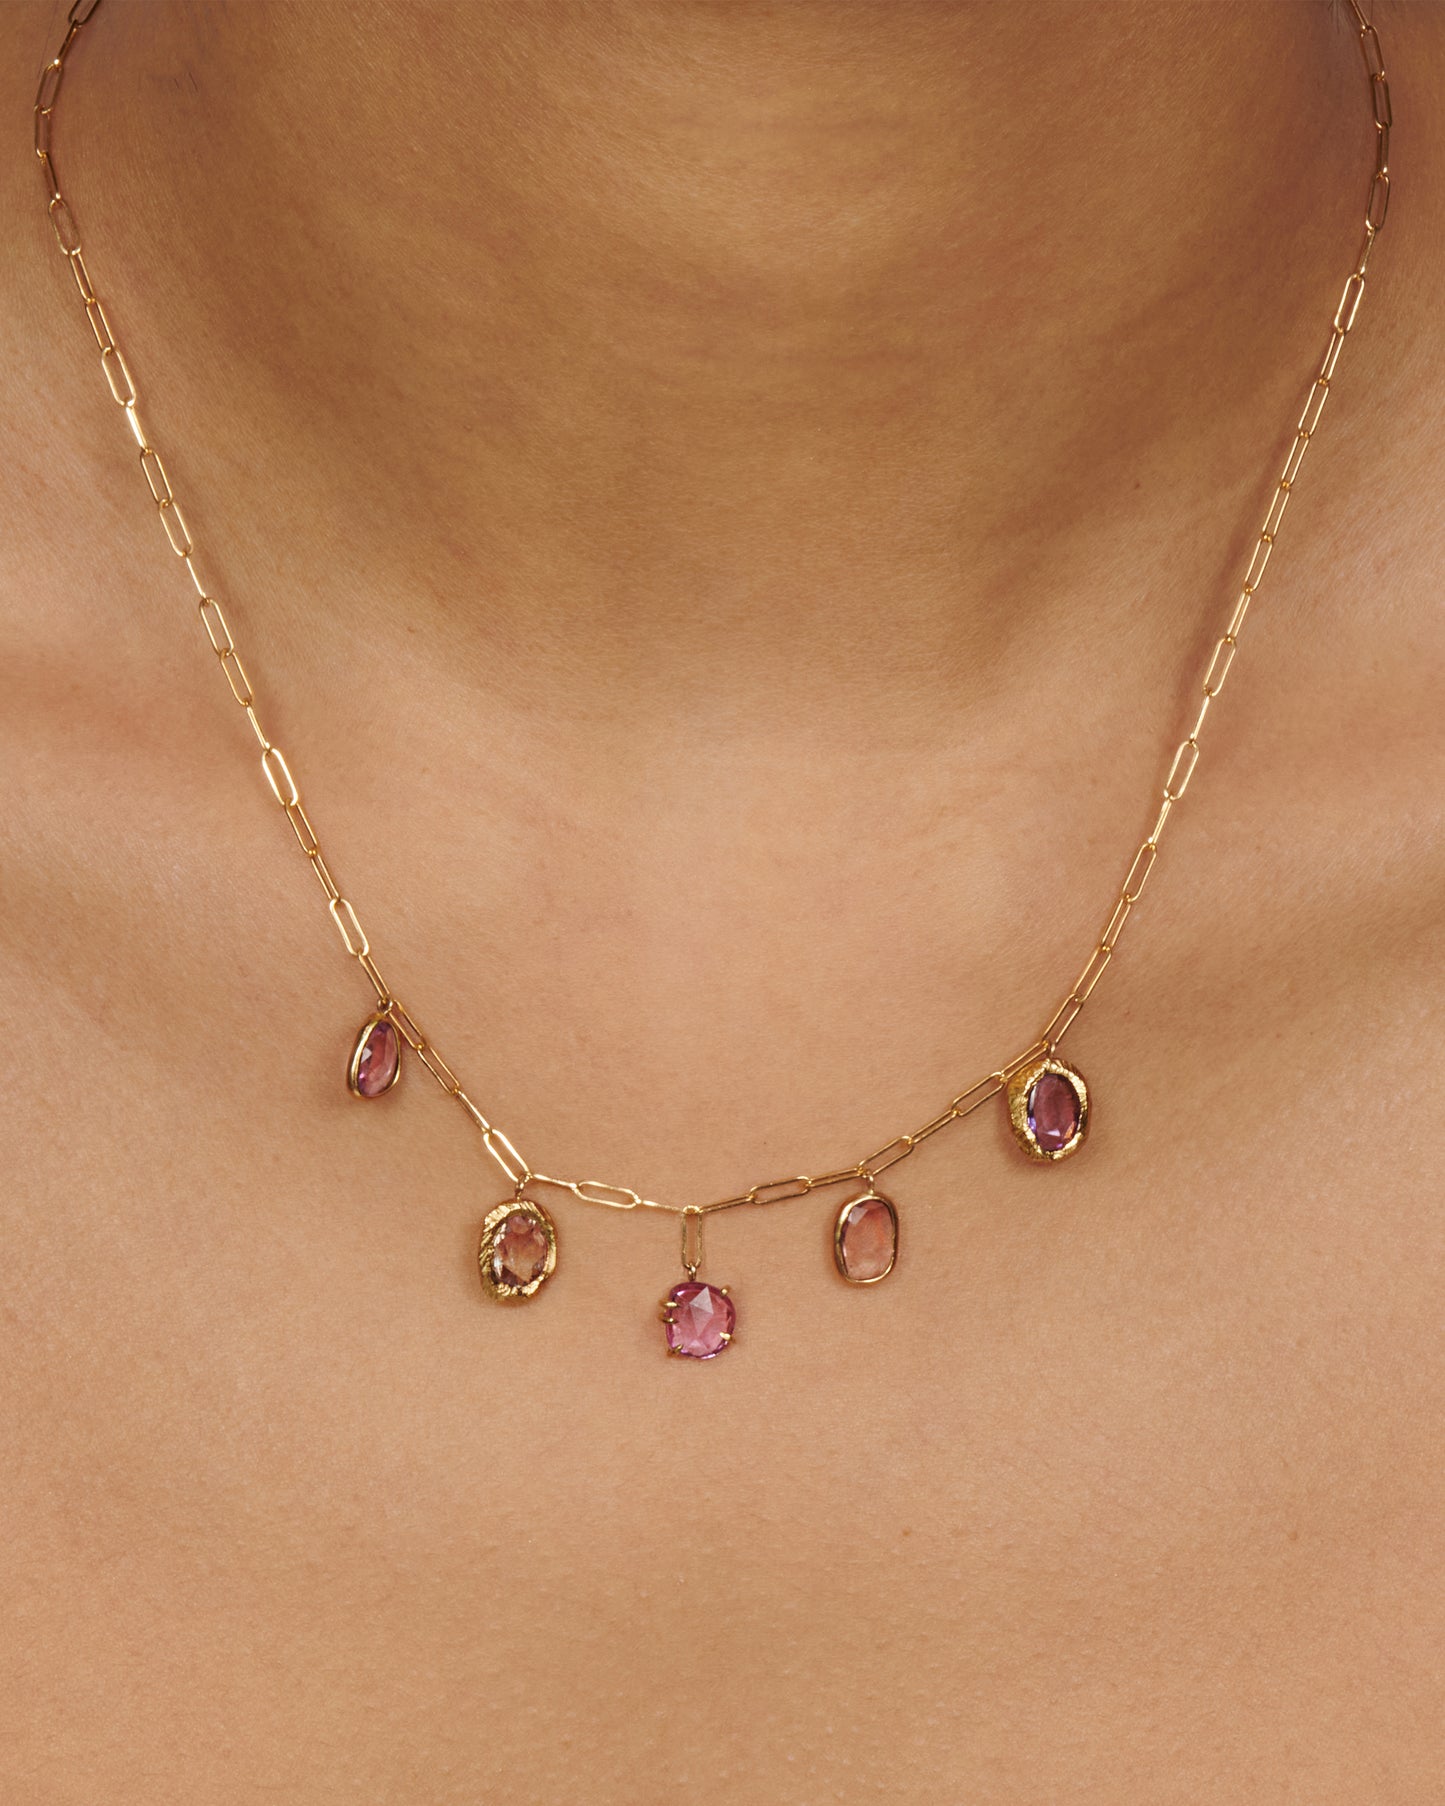 An oval link chain necklace with five rose cut sapphires, each in its own unique setting.